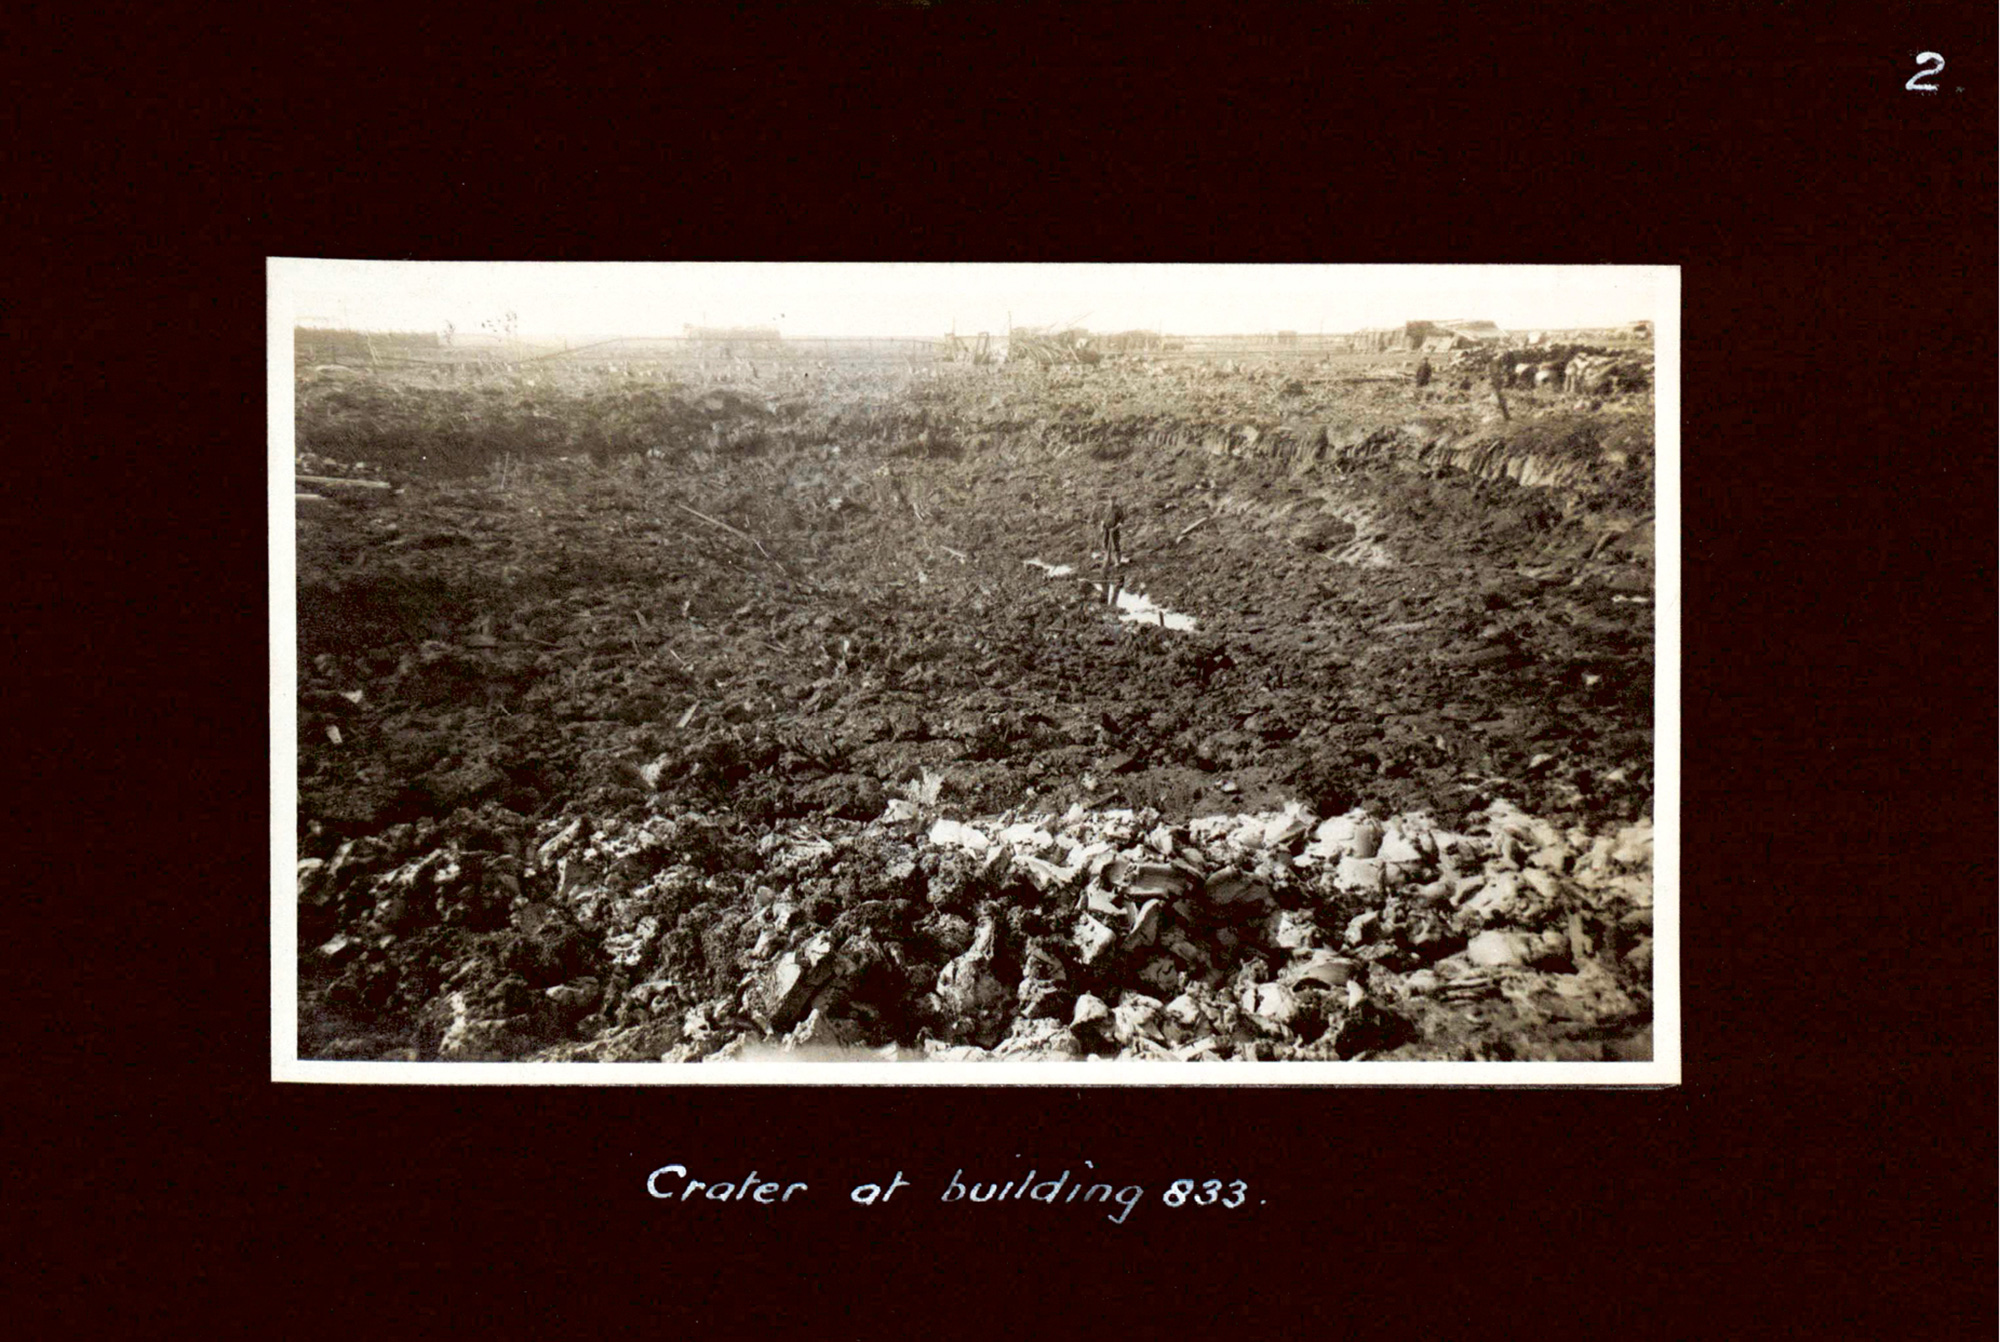 A photograph of the crater of Building 833 from an album collected for Major Cooper-Key’s report on “Accident Number 110, nineteen sixteen: Explosion of Tri-nitro-toluol and Ammonium Nitrate at Uplees Marches — Faversham.”